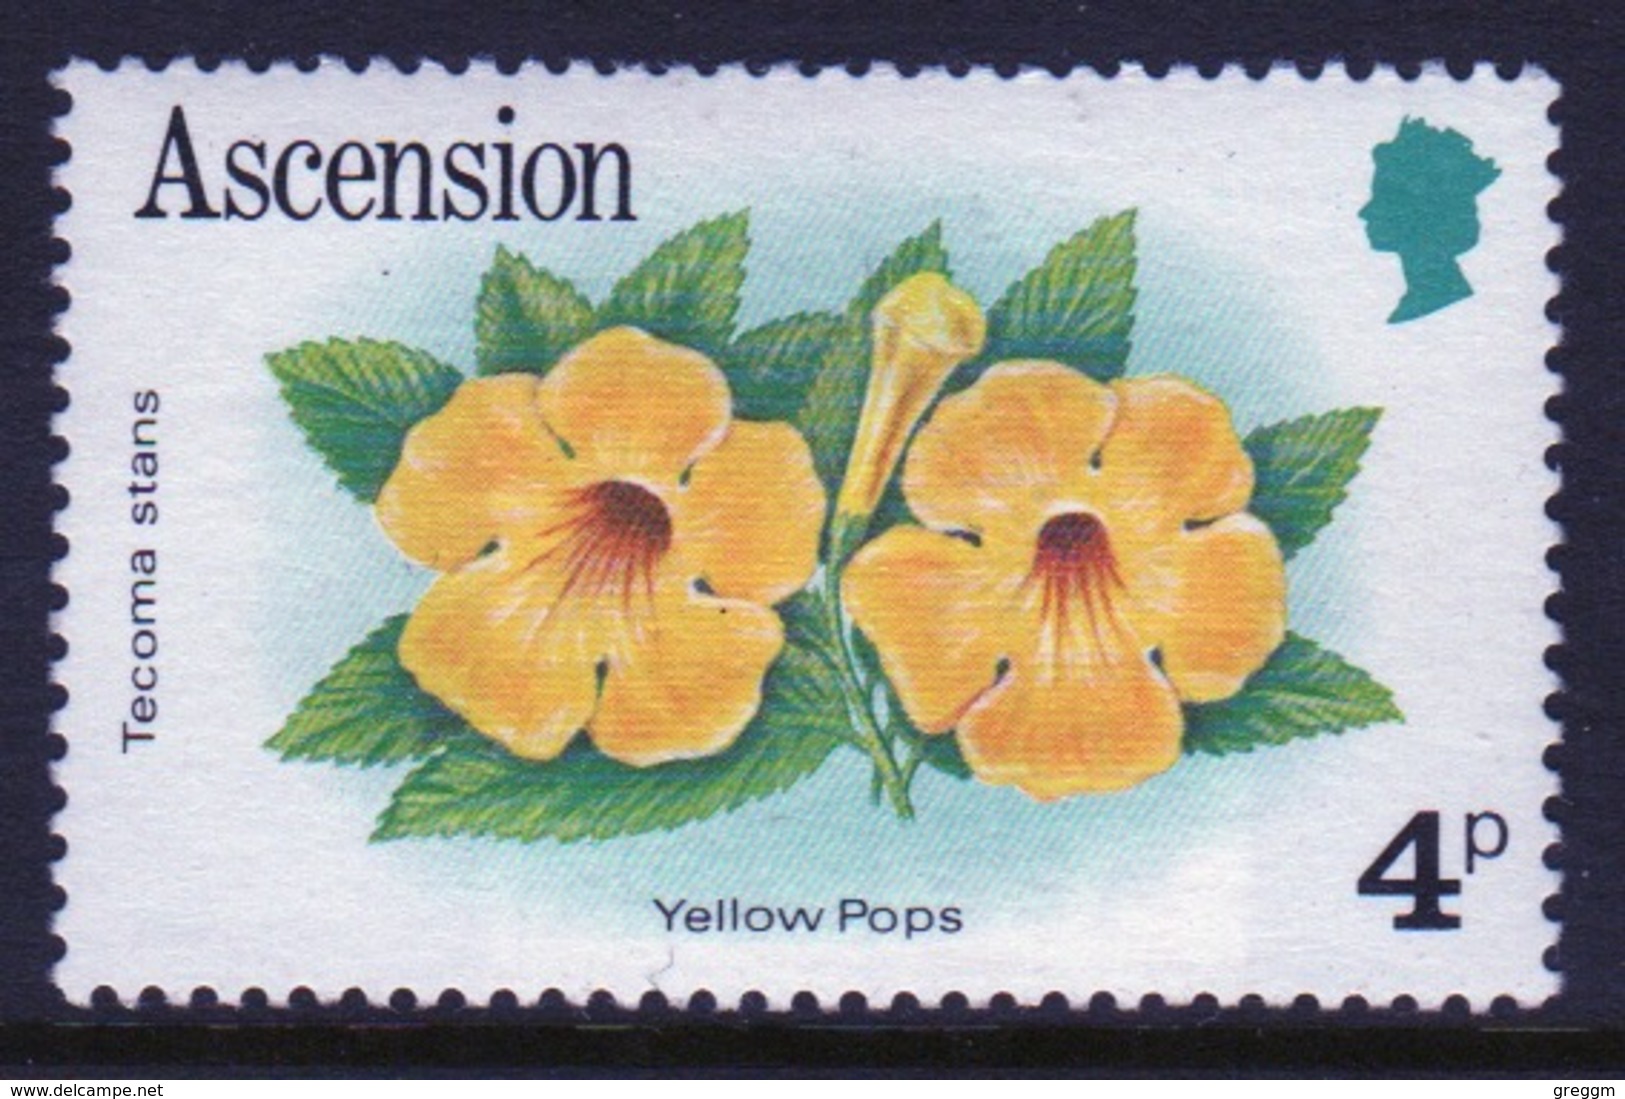 Ascension Queen Elizabeth Unmounted Mint 4p Stamp From 1981 Set On Flowers. - Ascension